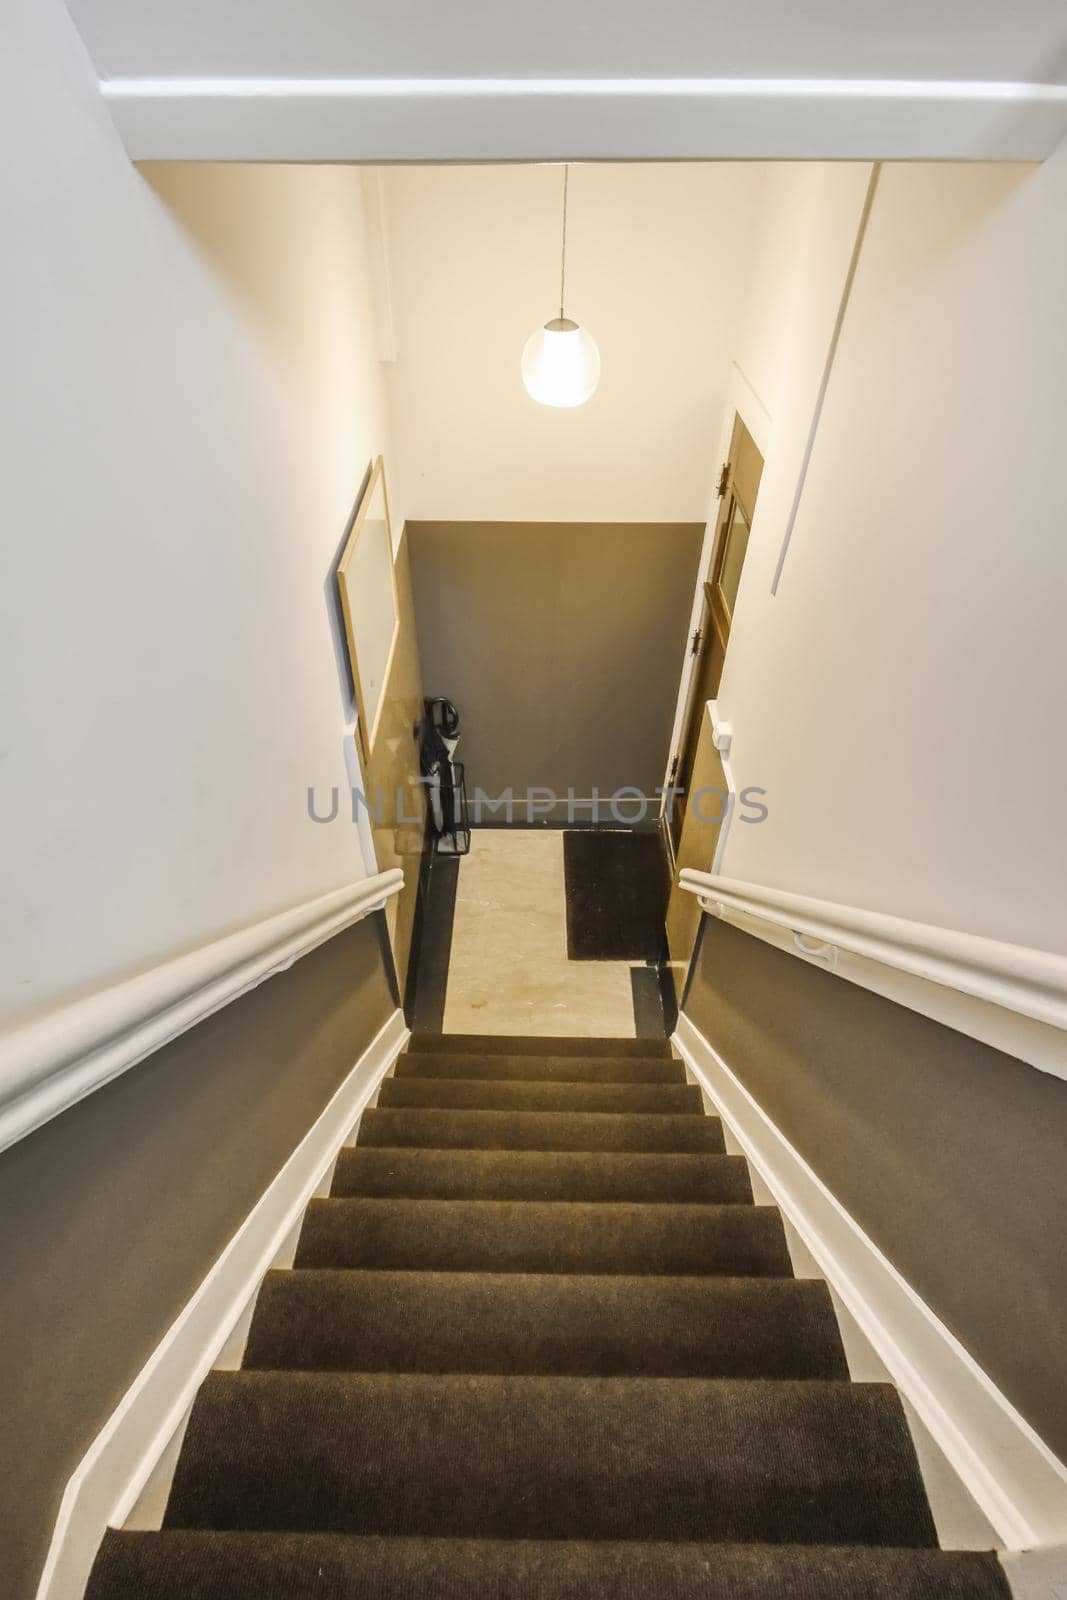 Beautiful staircase with gray carpet and comfortable handrails